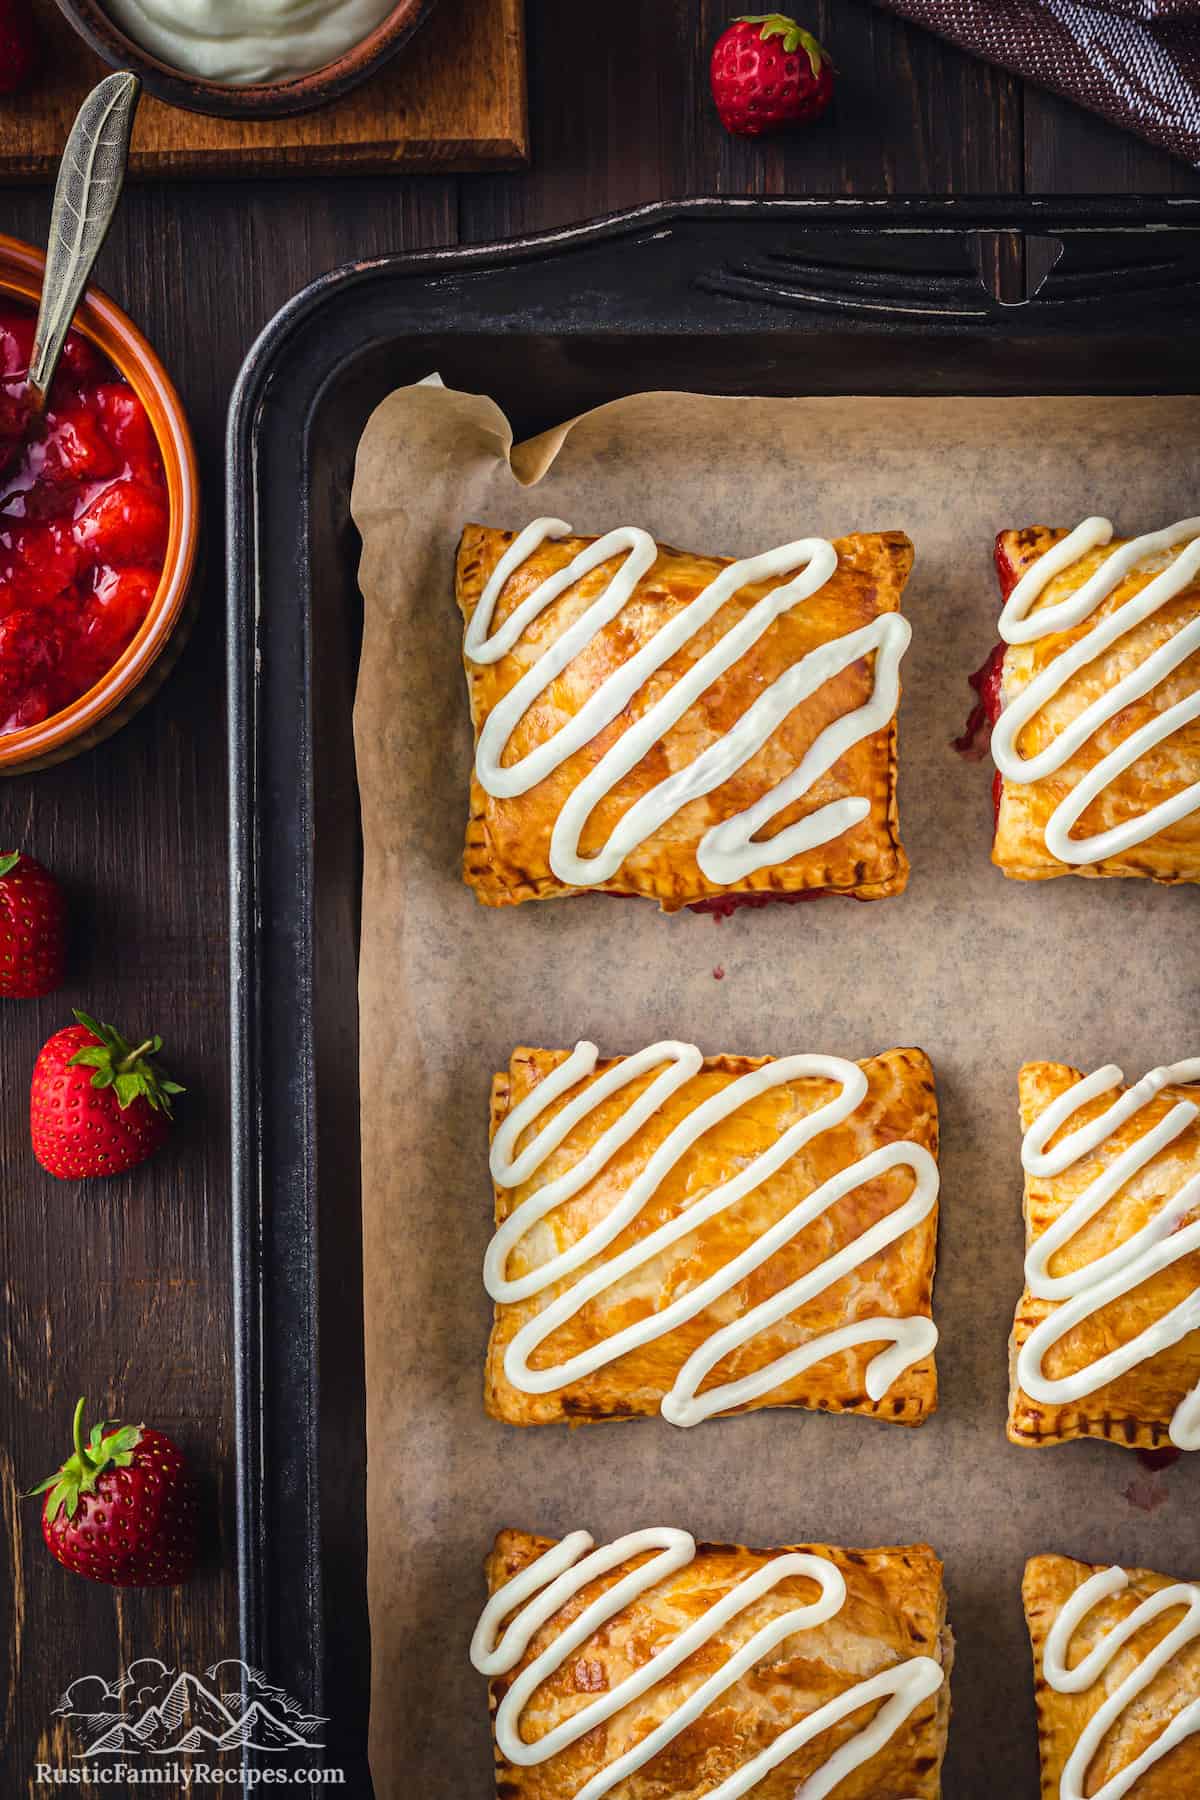 Top view of baked strawberry toaster strudels on a baking sheet topped with squiggles of cream cheese frosting.